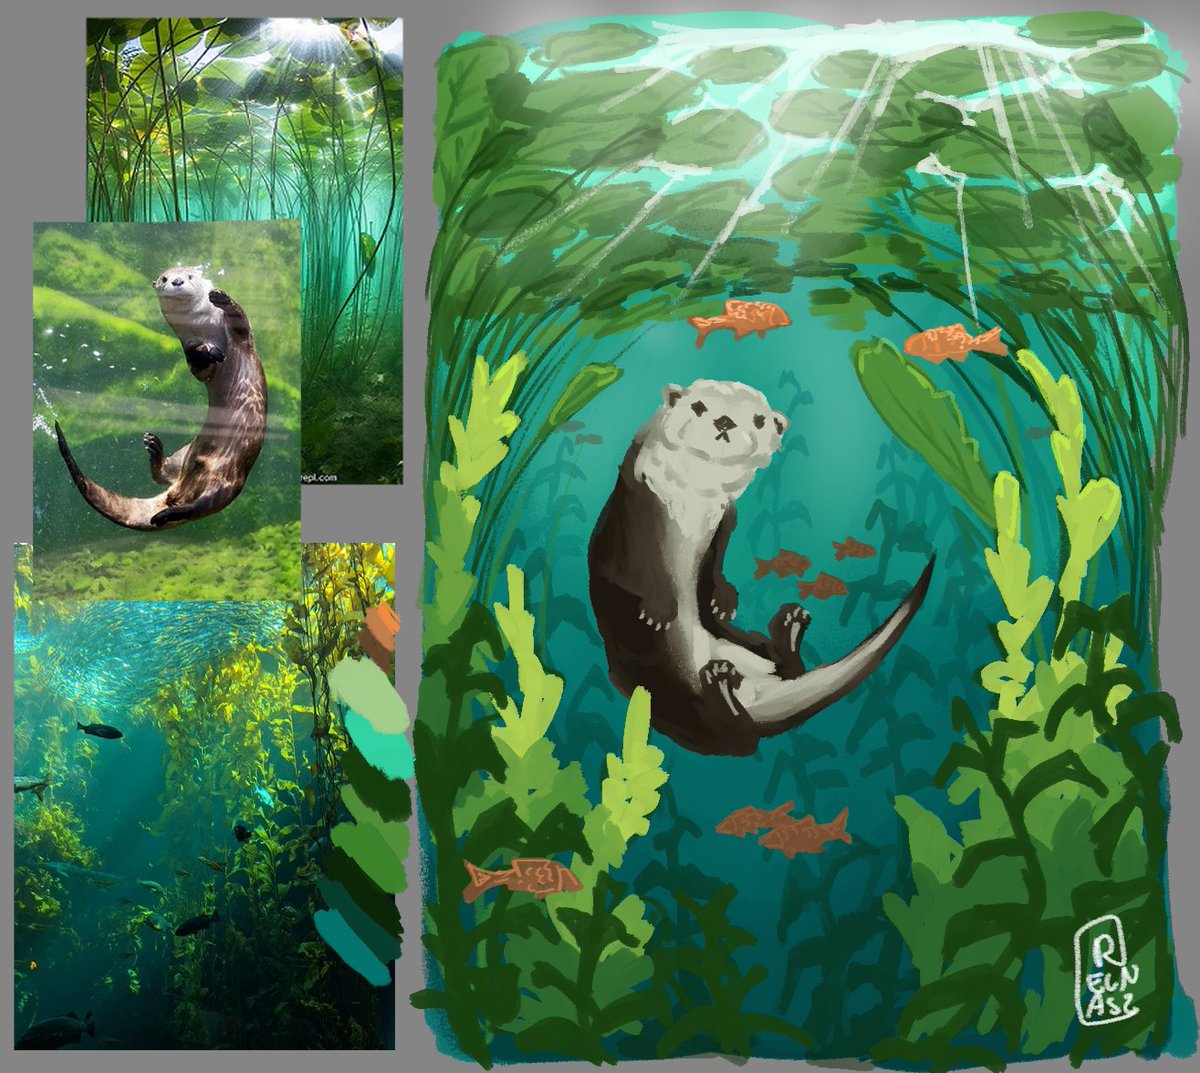 i saw a post saying #Neuvillette is just like an otter so i had to draw an otter